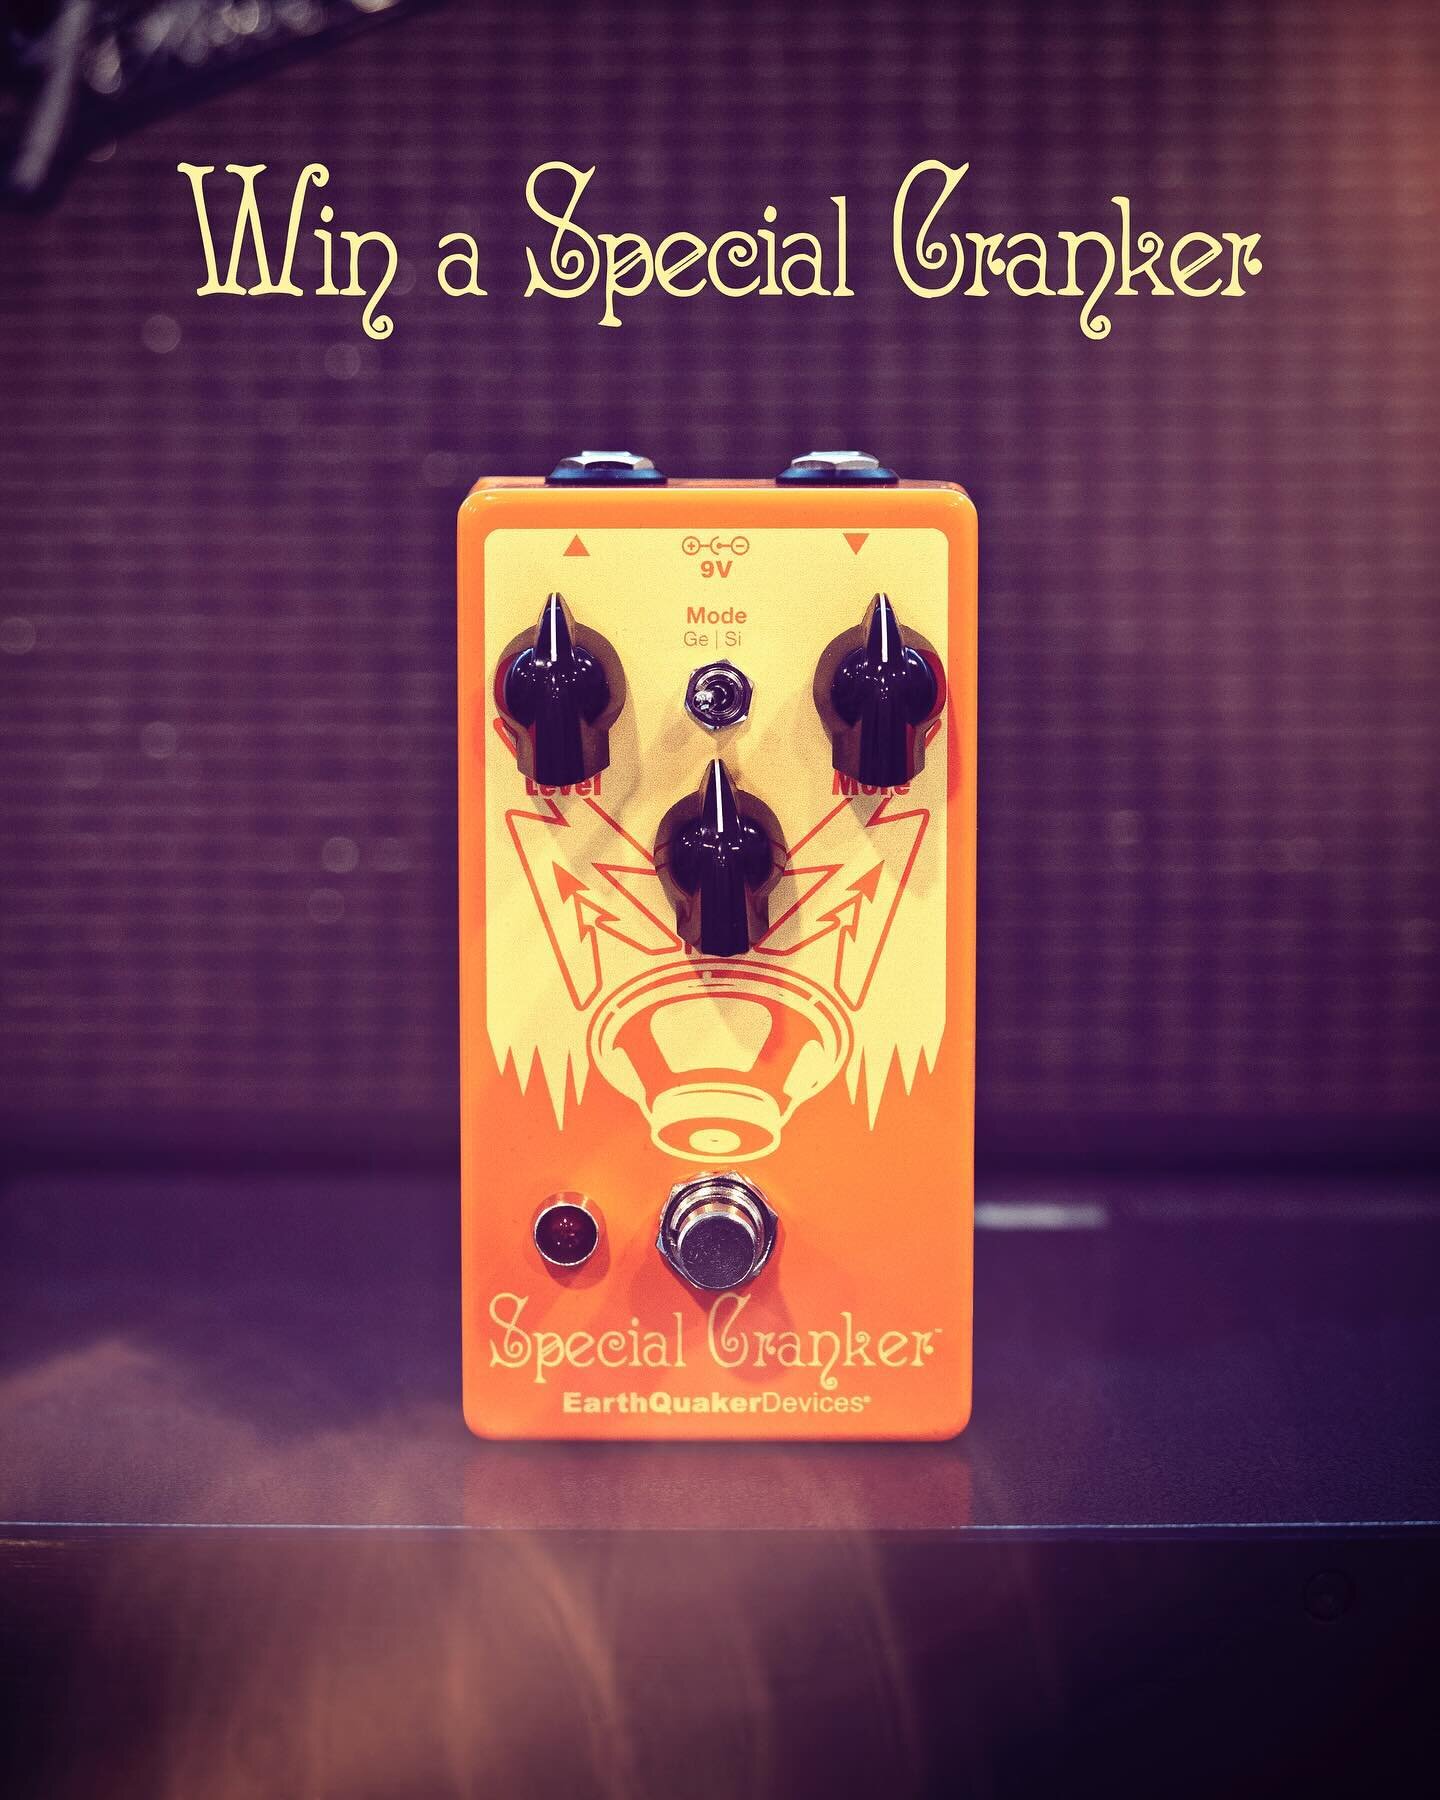 Come on inside out of the cold and try out any @earthquakerdev pedal and we will get ya signed up to win a special cranker that will make you feel all warm on the inside.  #pedalgiveaway #shoplocal  #shopsmall #downtownjohnsoncitytn  #earthquakerpeda